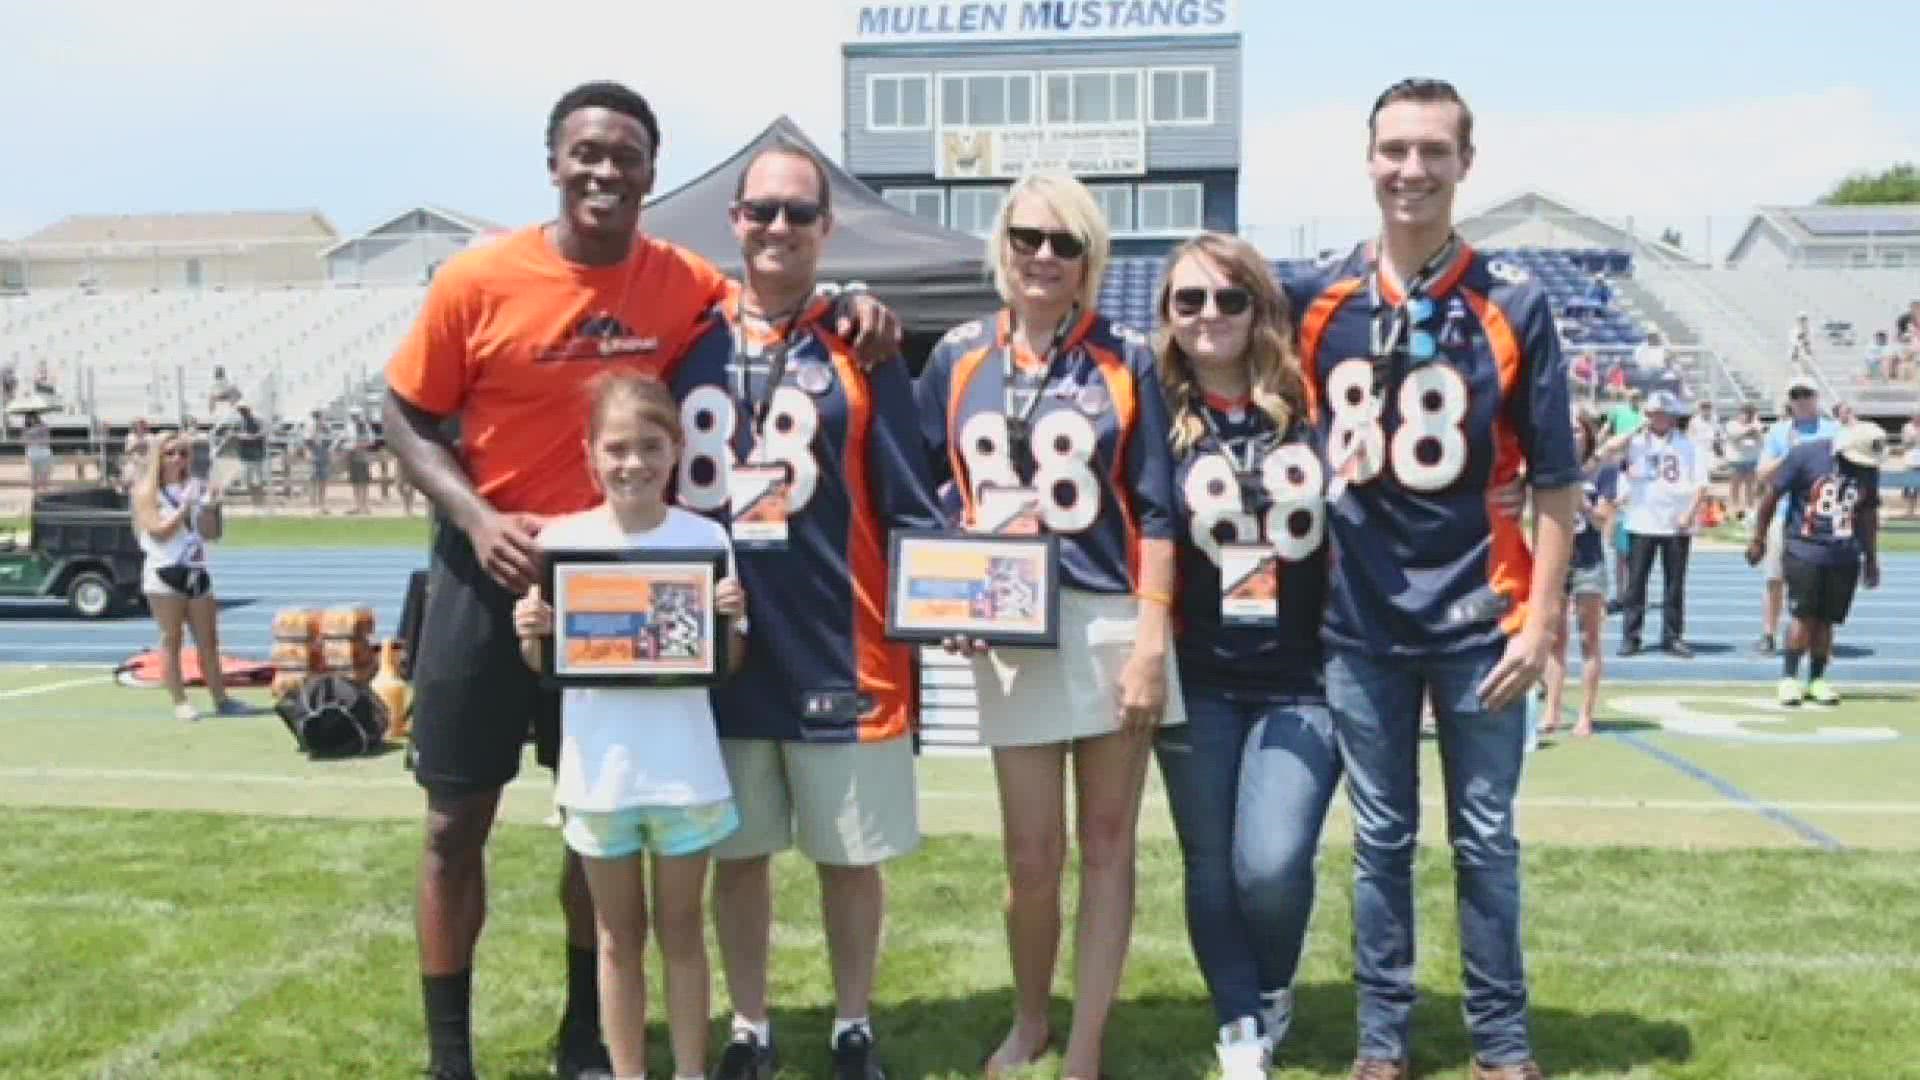 Demaryius Thomas bonded with family over son's courage